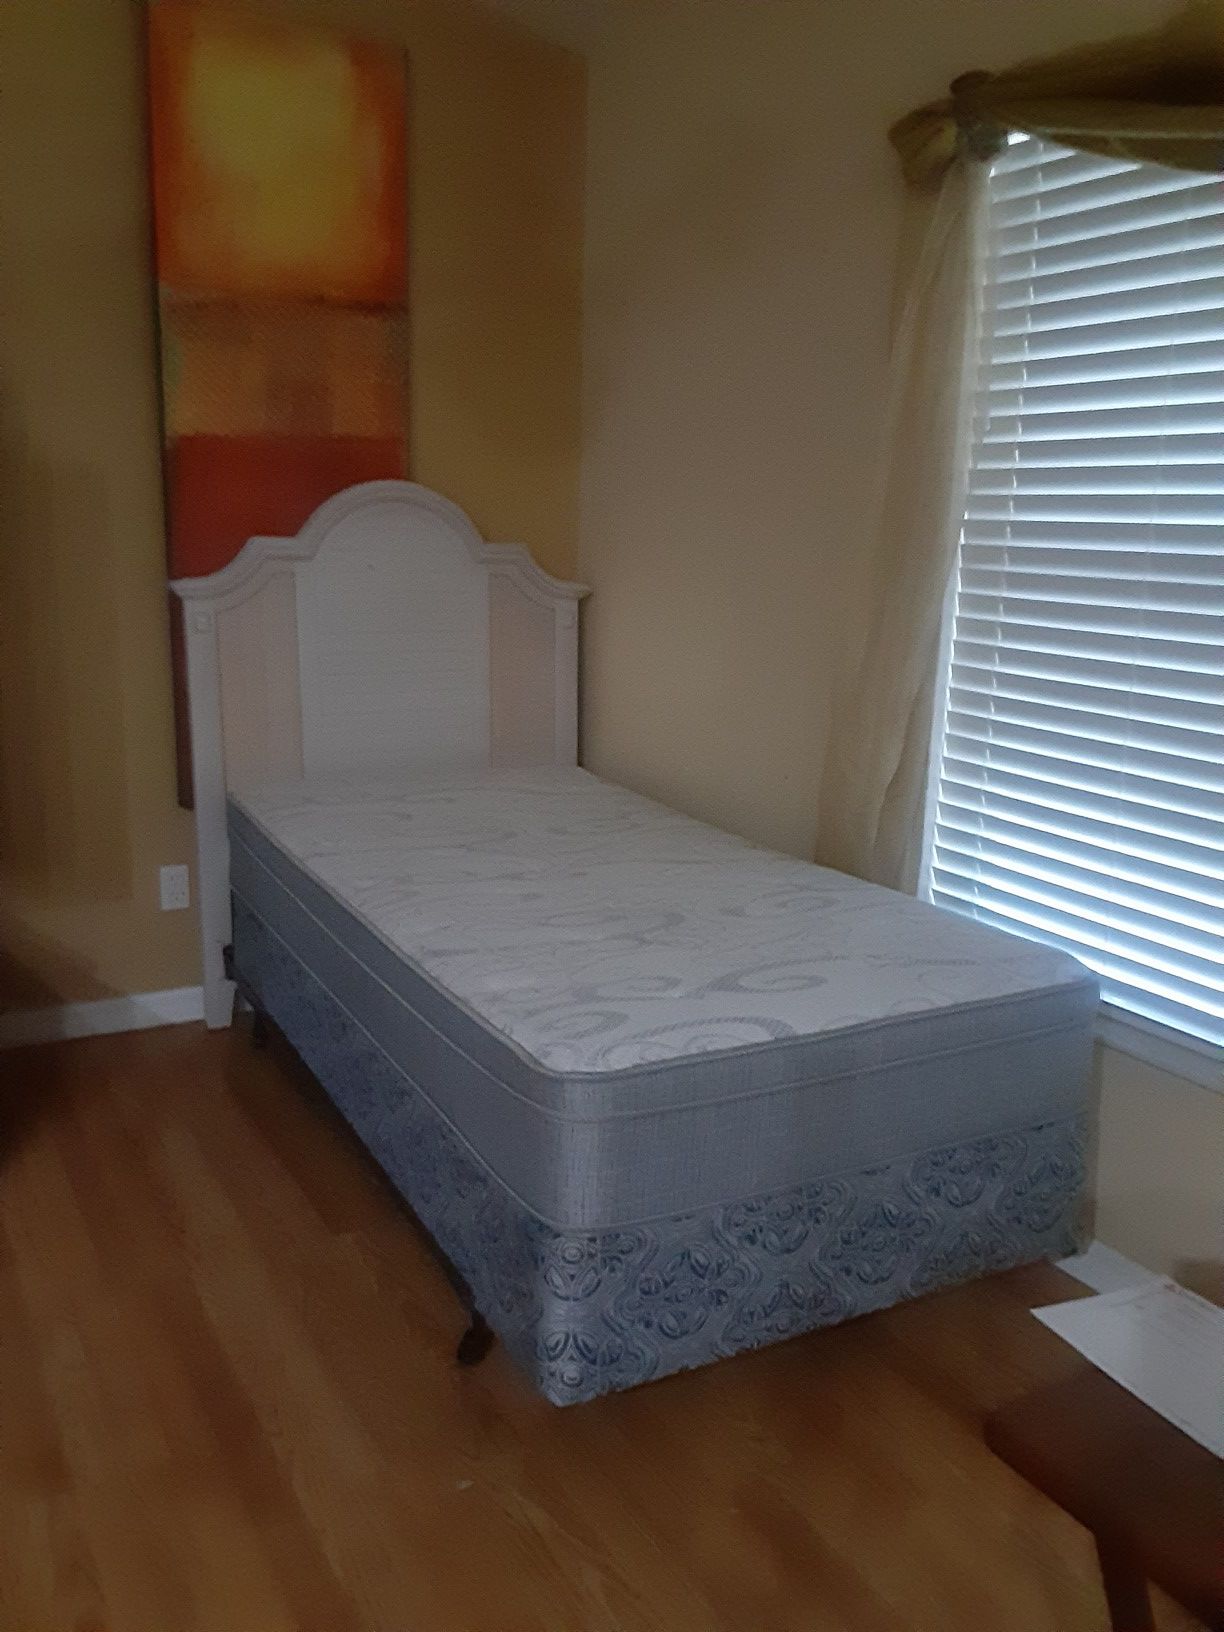 Rooms To Go twin bed